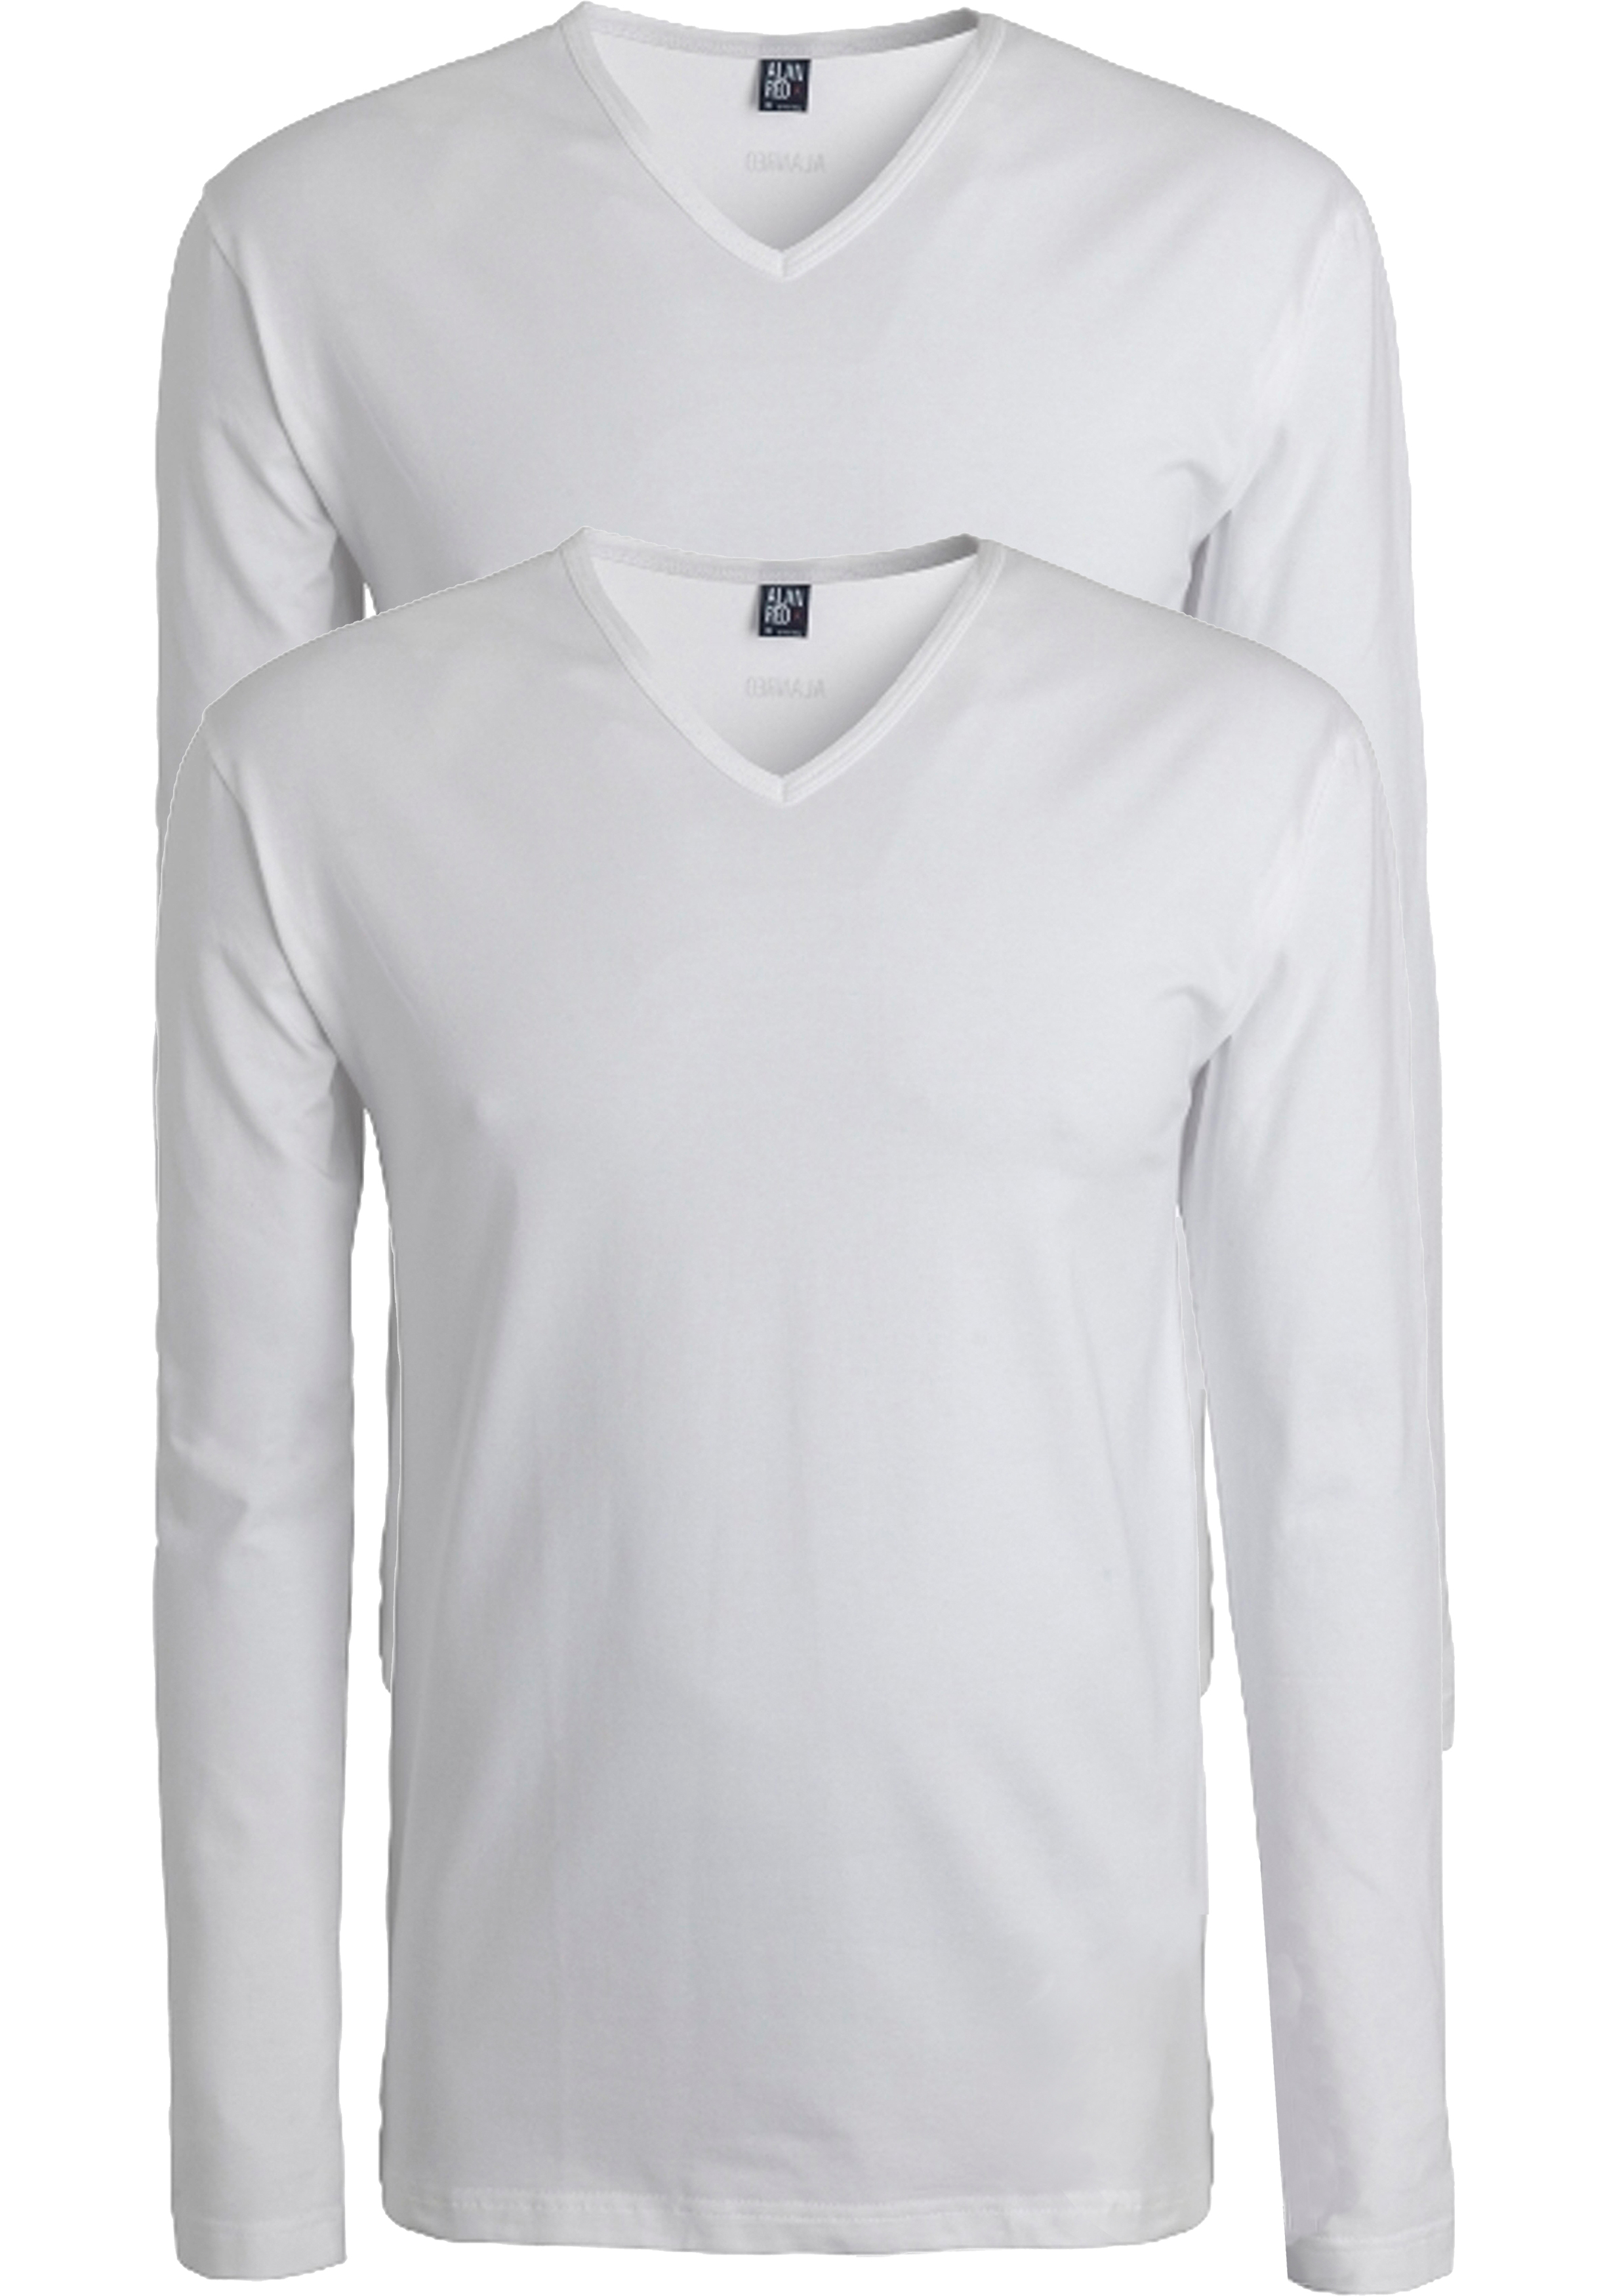 Of later Nucleair steno ALAN RED T-shirts Oslo (2-pack), V-hals lange mouw stretch, wit - Shop de  nieuwste voorjaarsmode